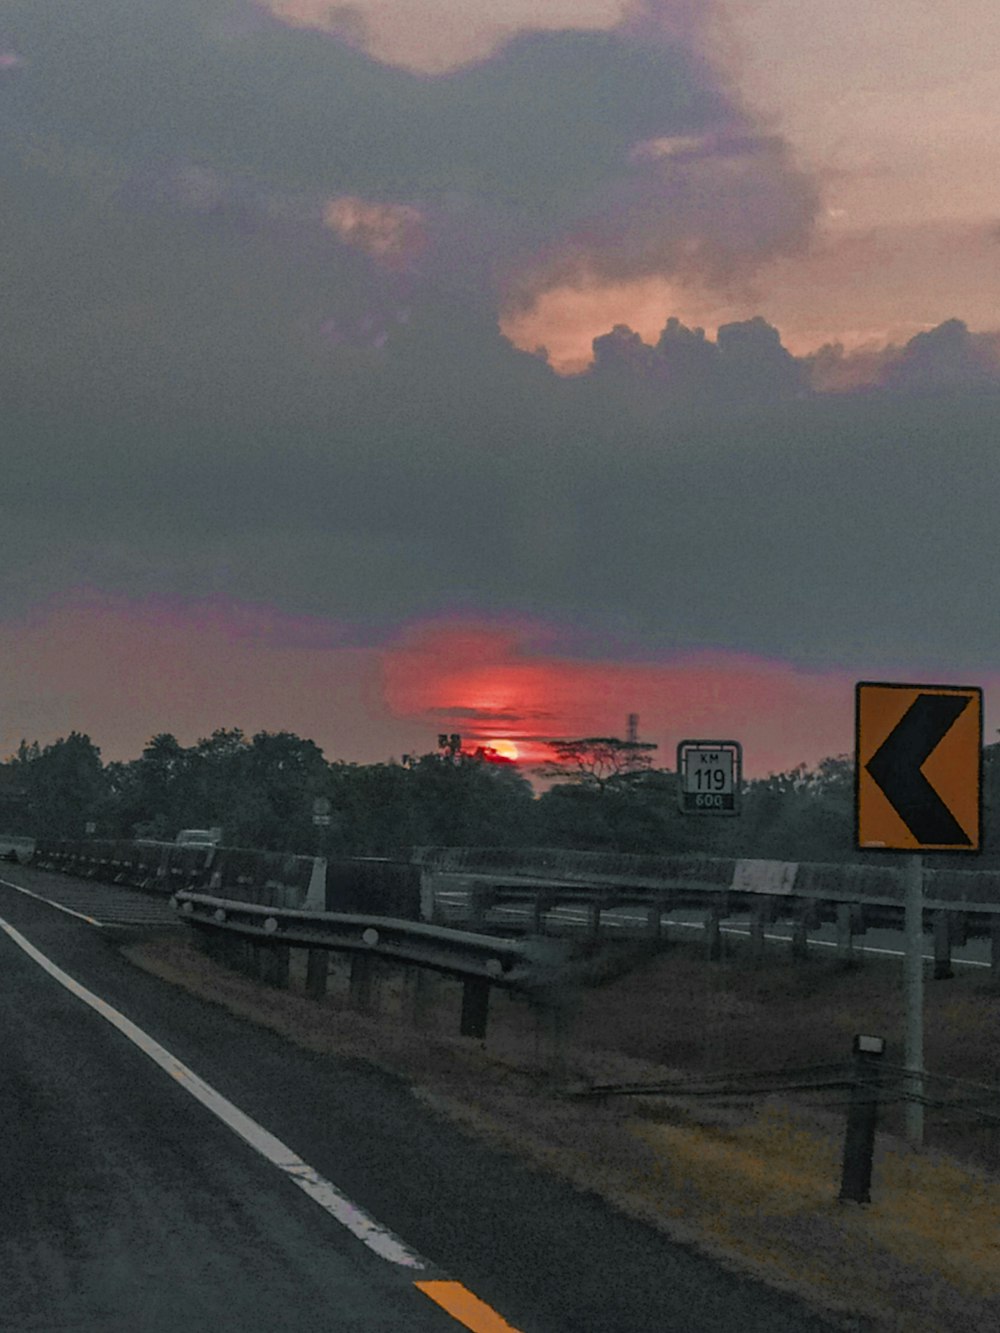 the sun is setting on the horizon of a highway